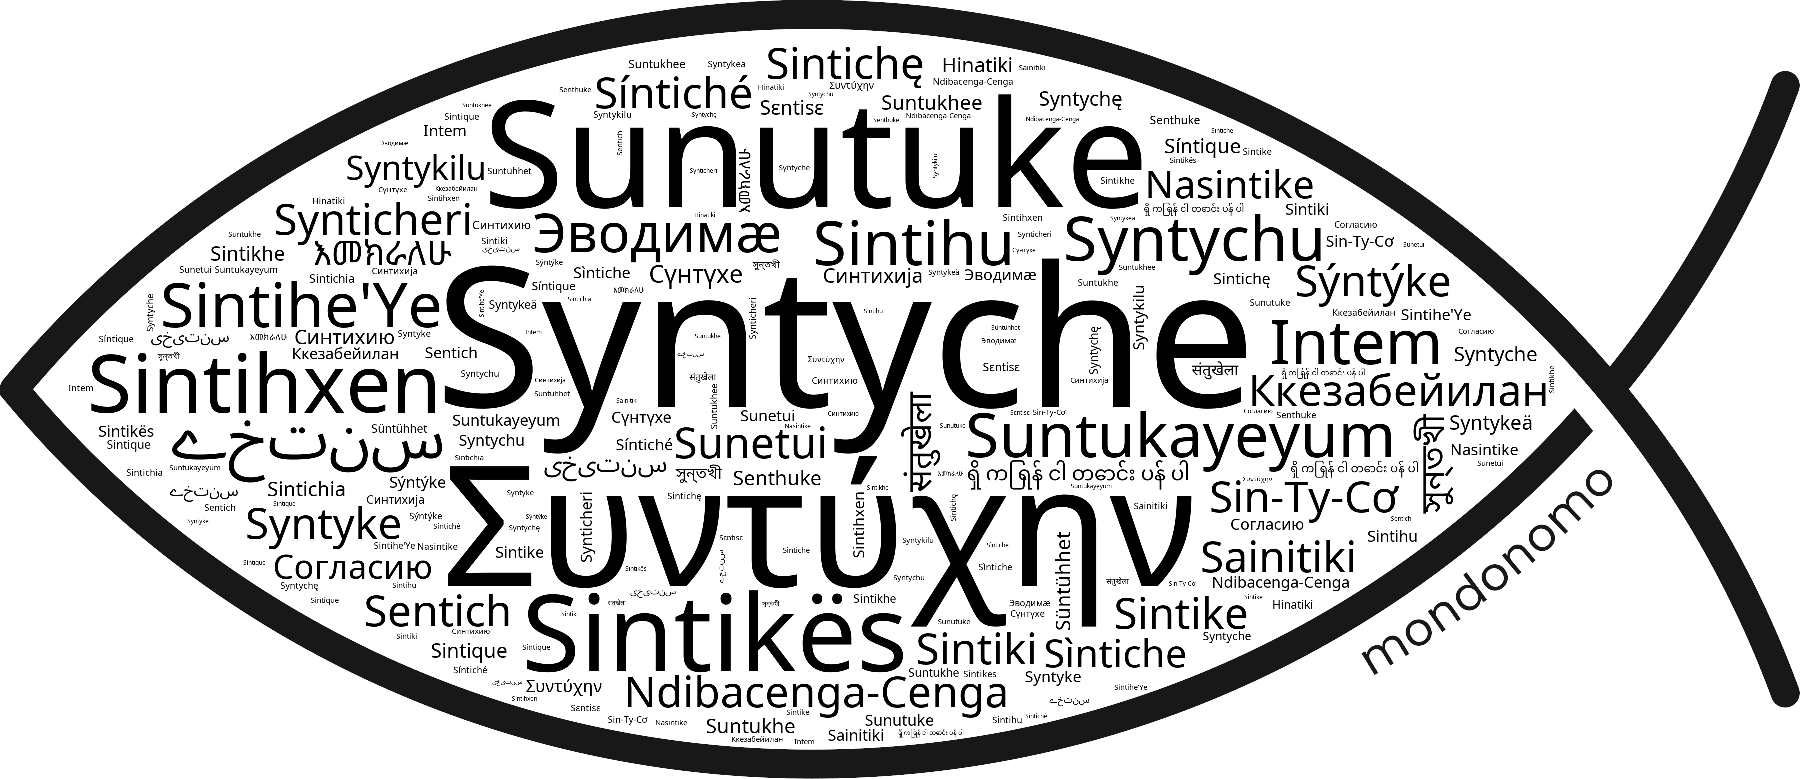 Name Syntyche in the world's Bibles